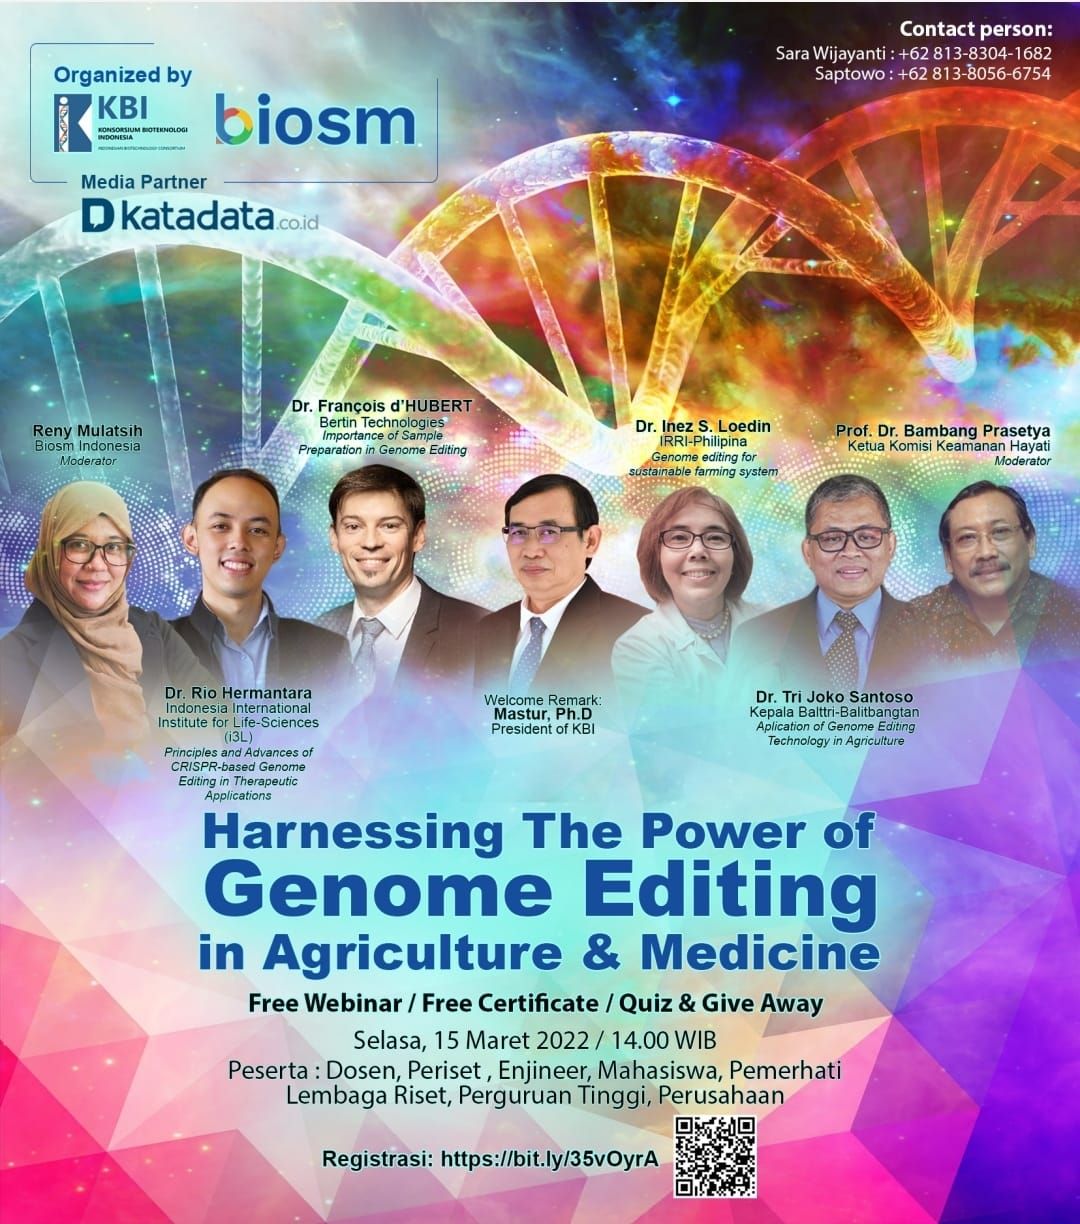 Webinar “Harnessing The Power of Genome Editing in Agriculture & Medicine